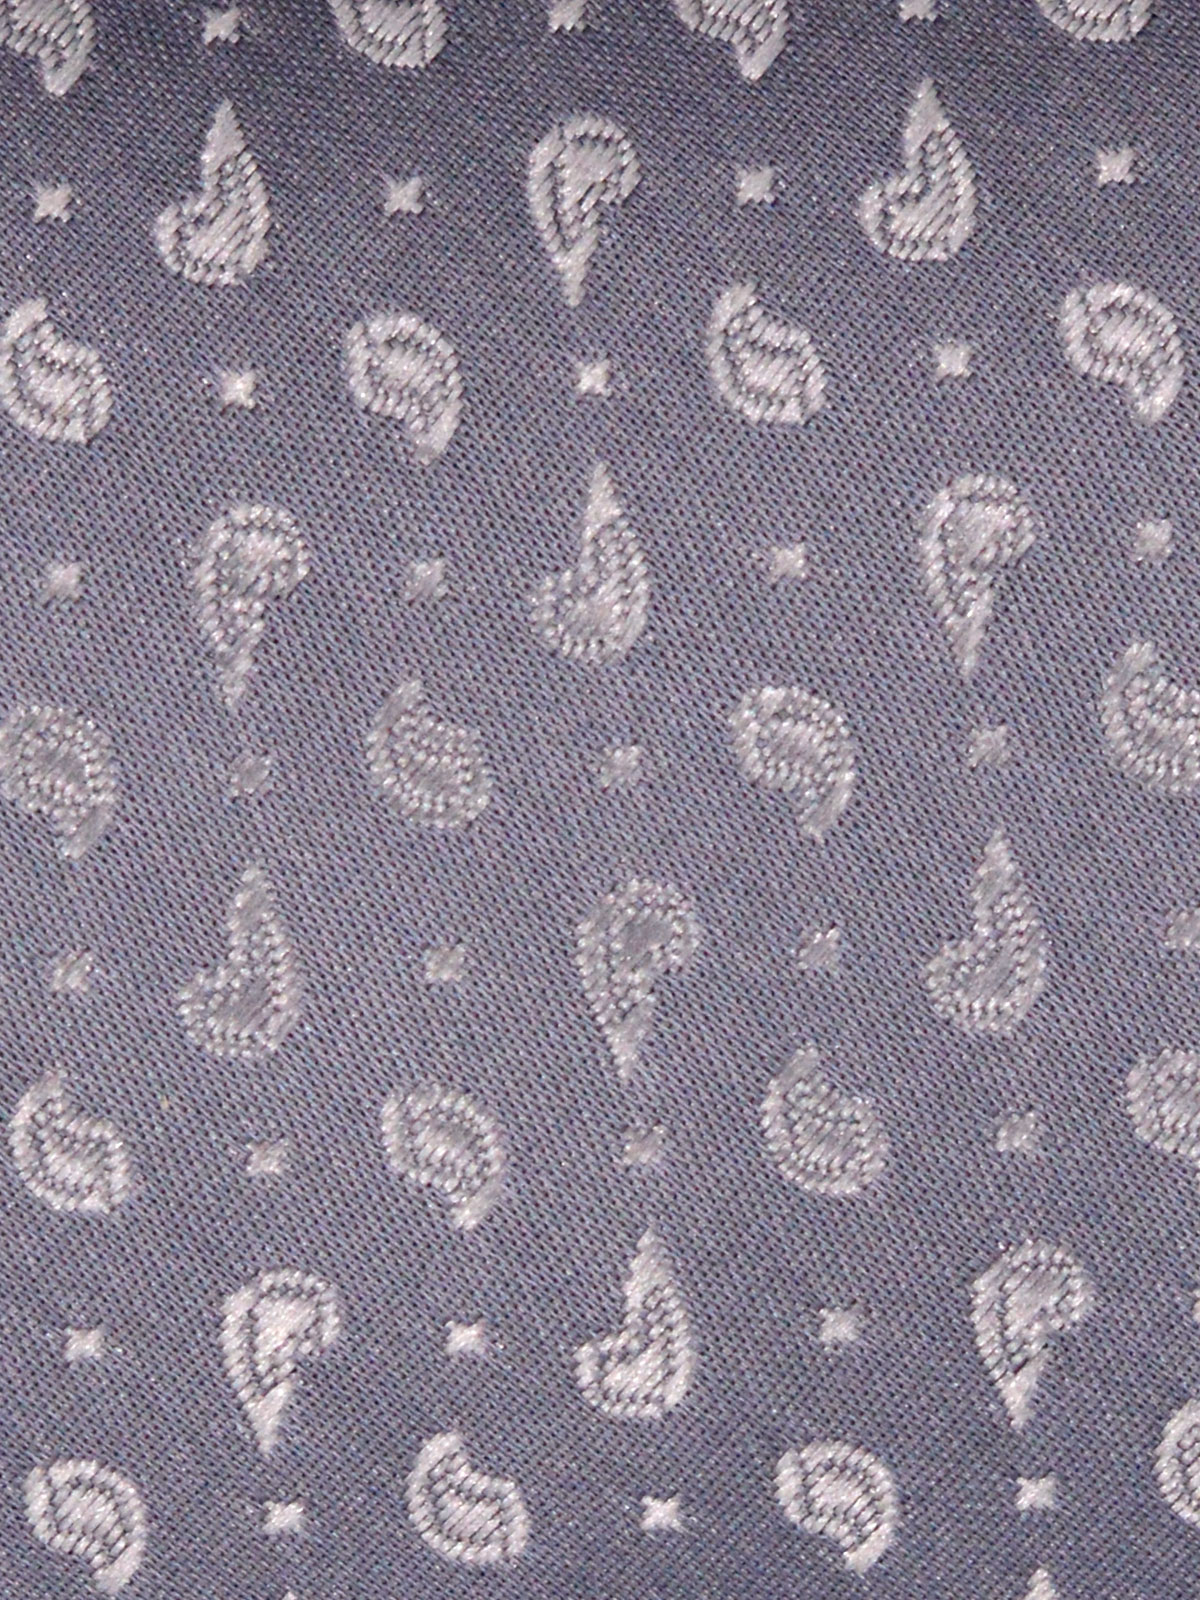  tie in gray with embossed paisley  - 10073 - € 14.06 img2